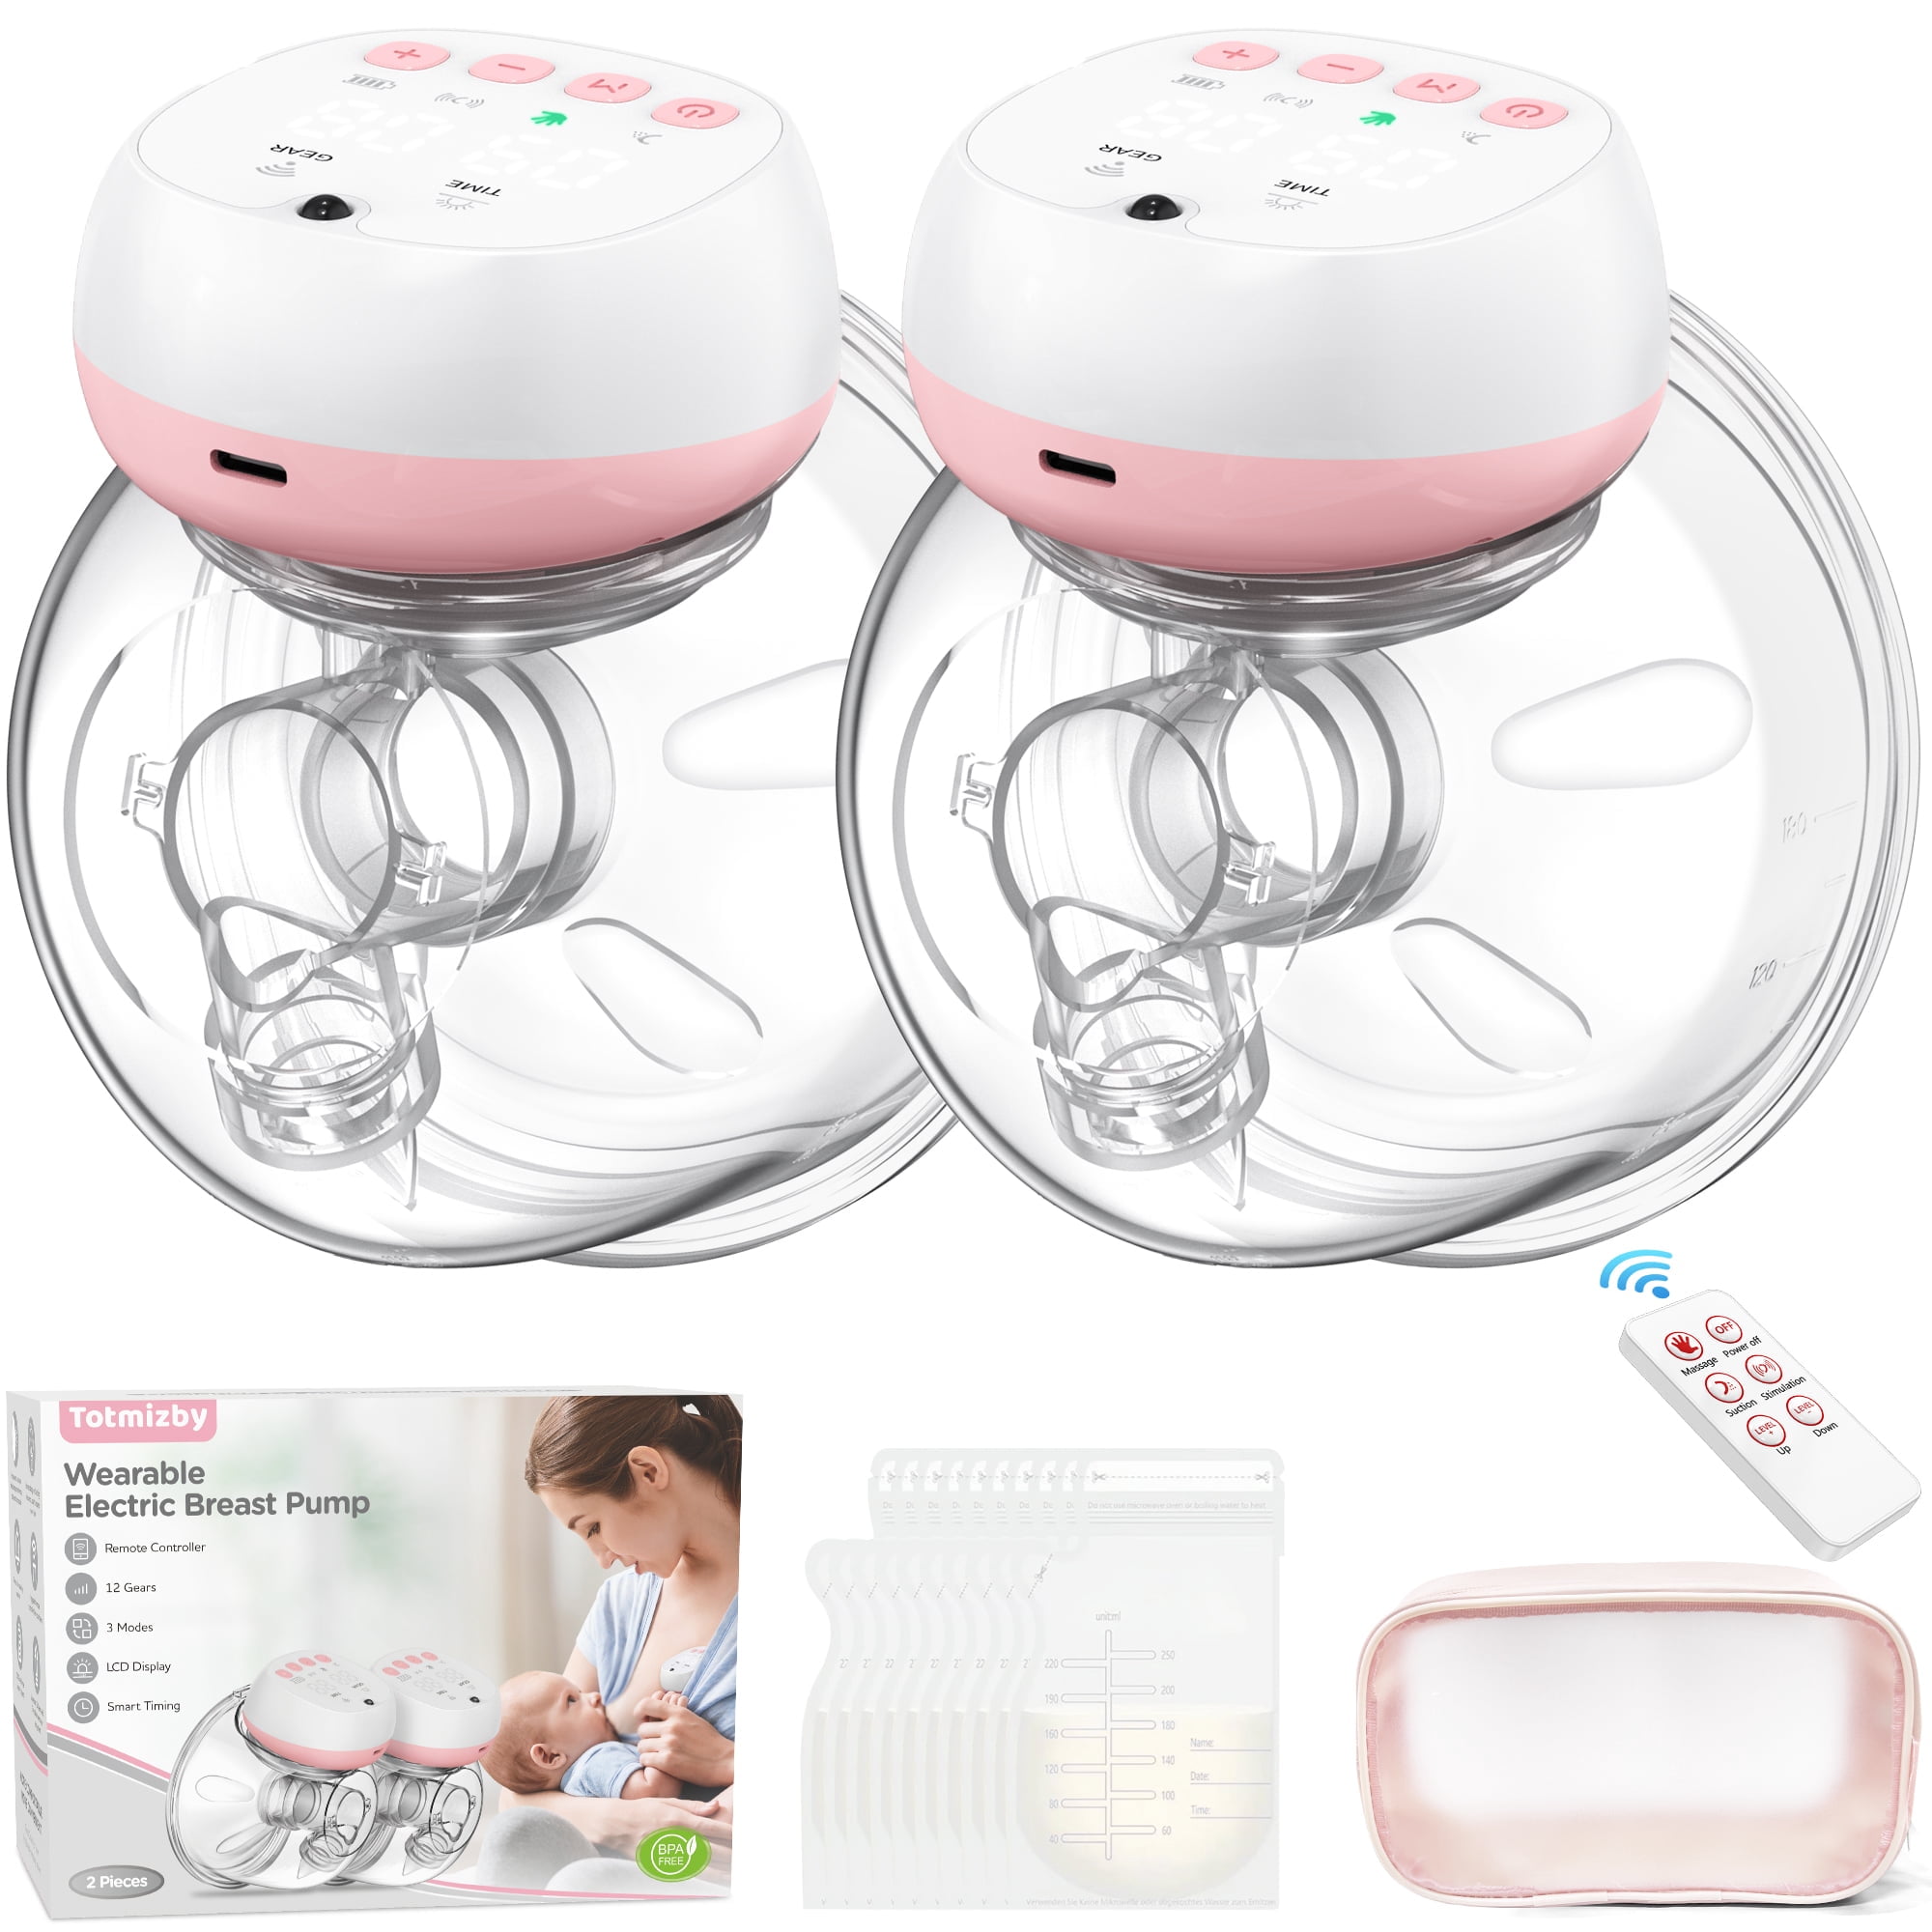 Totmizby Wearable Breast Pump, Double Hands-Free Remote Control